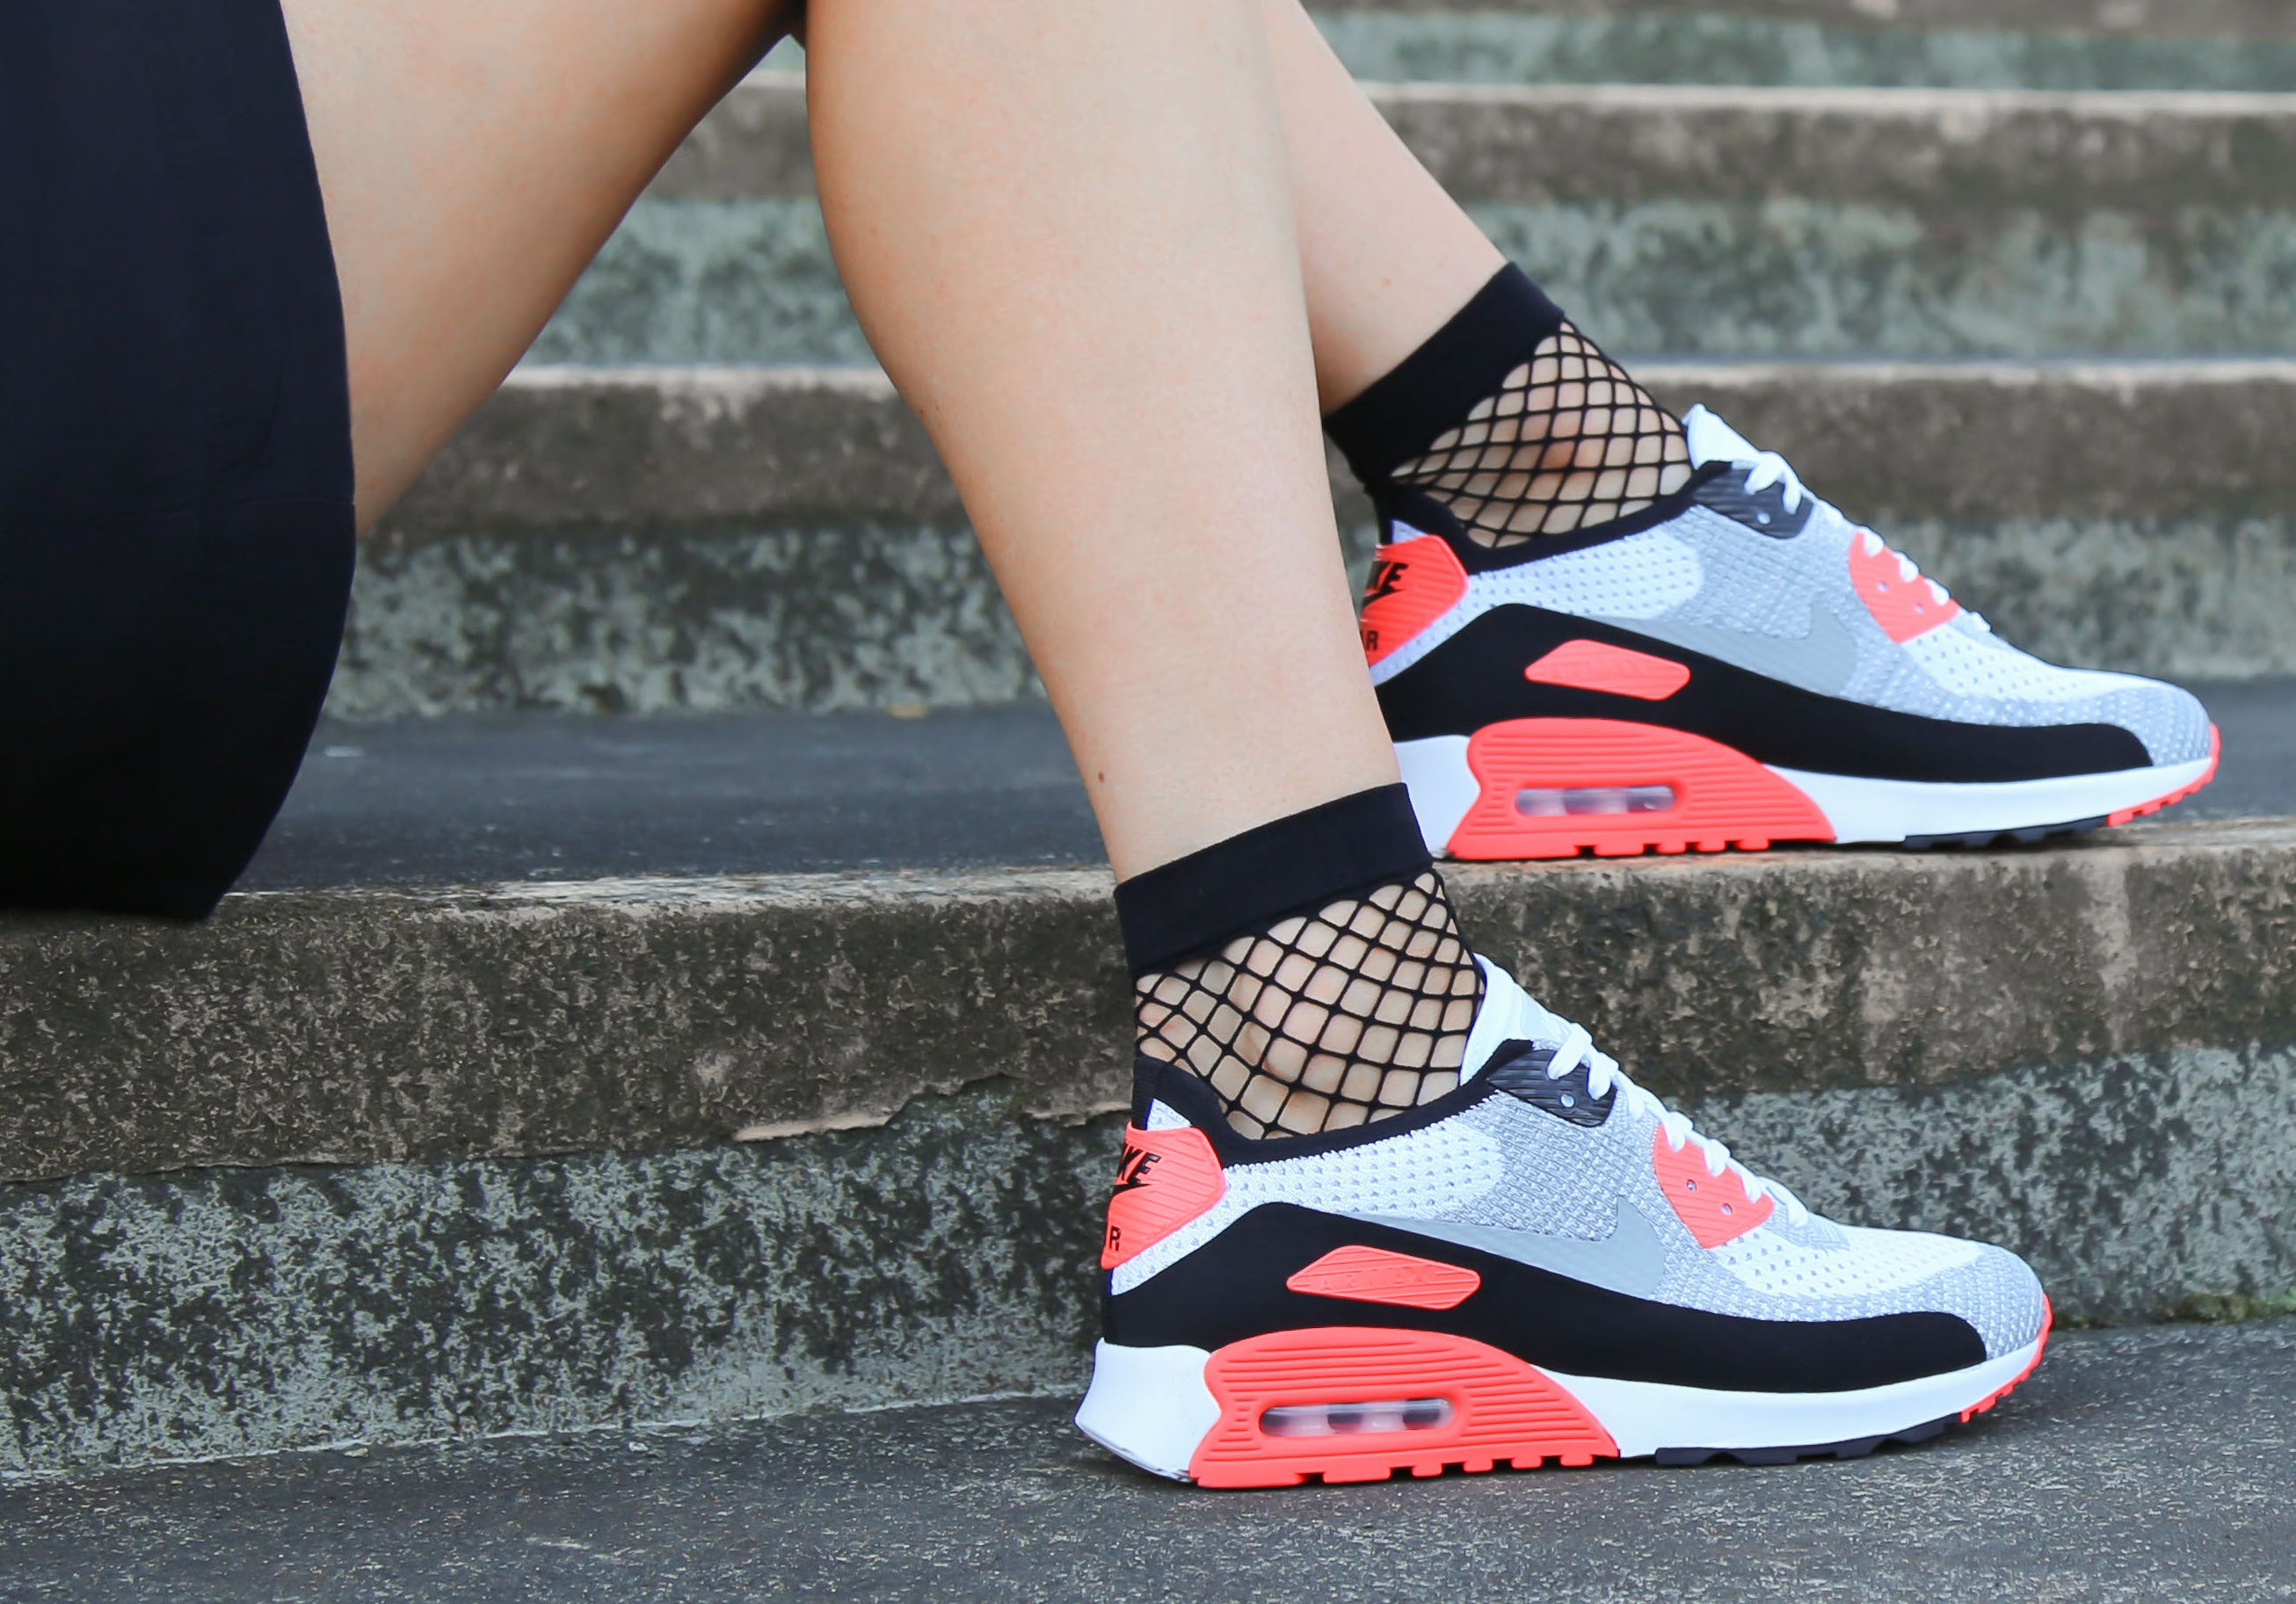 Bañera Lanzamiento hambruna Nike Women's Air Max 90 Ultra 2.0 Flyknit Infrared Review | STYLE – Finesse